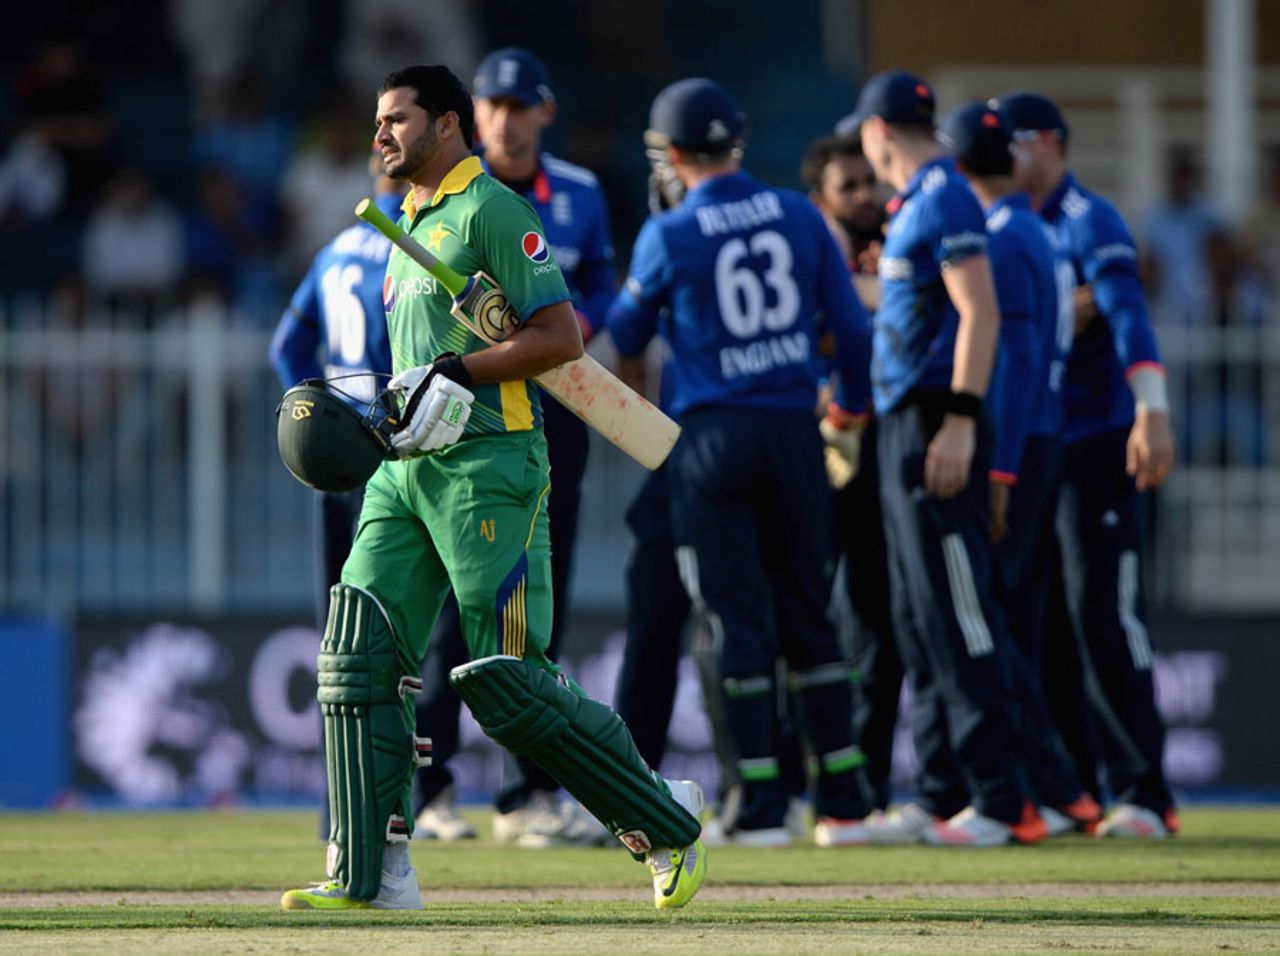 Azhar Ali was run out during a mix-up with Mohammad Hafeez, Pakistan v England, 3rd ODI, Sharjah, November 17, 2015